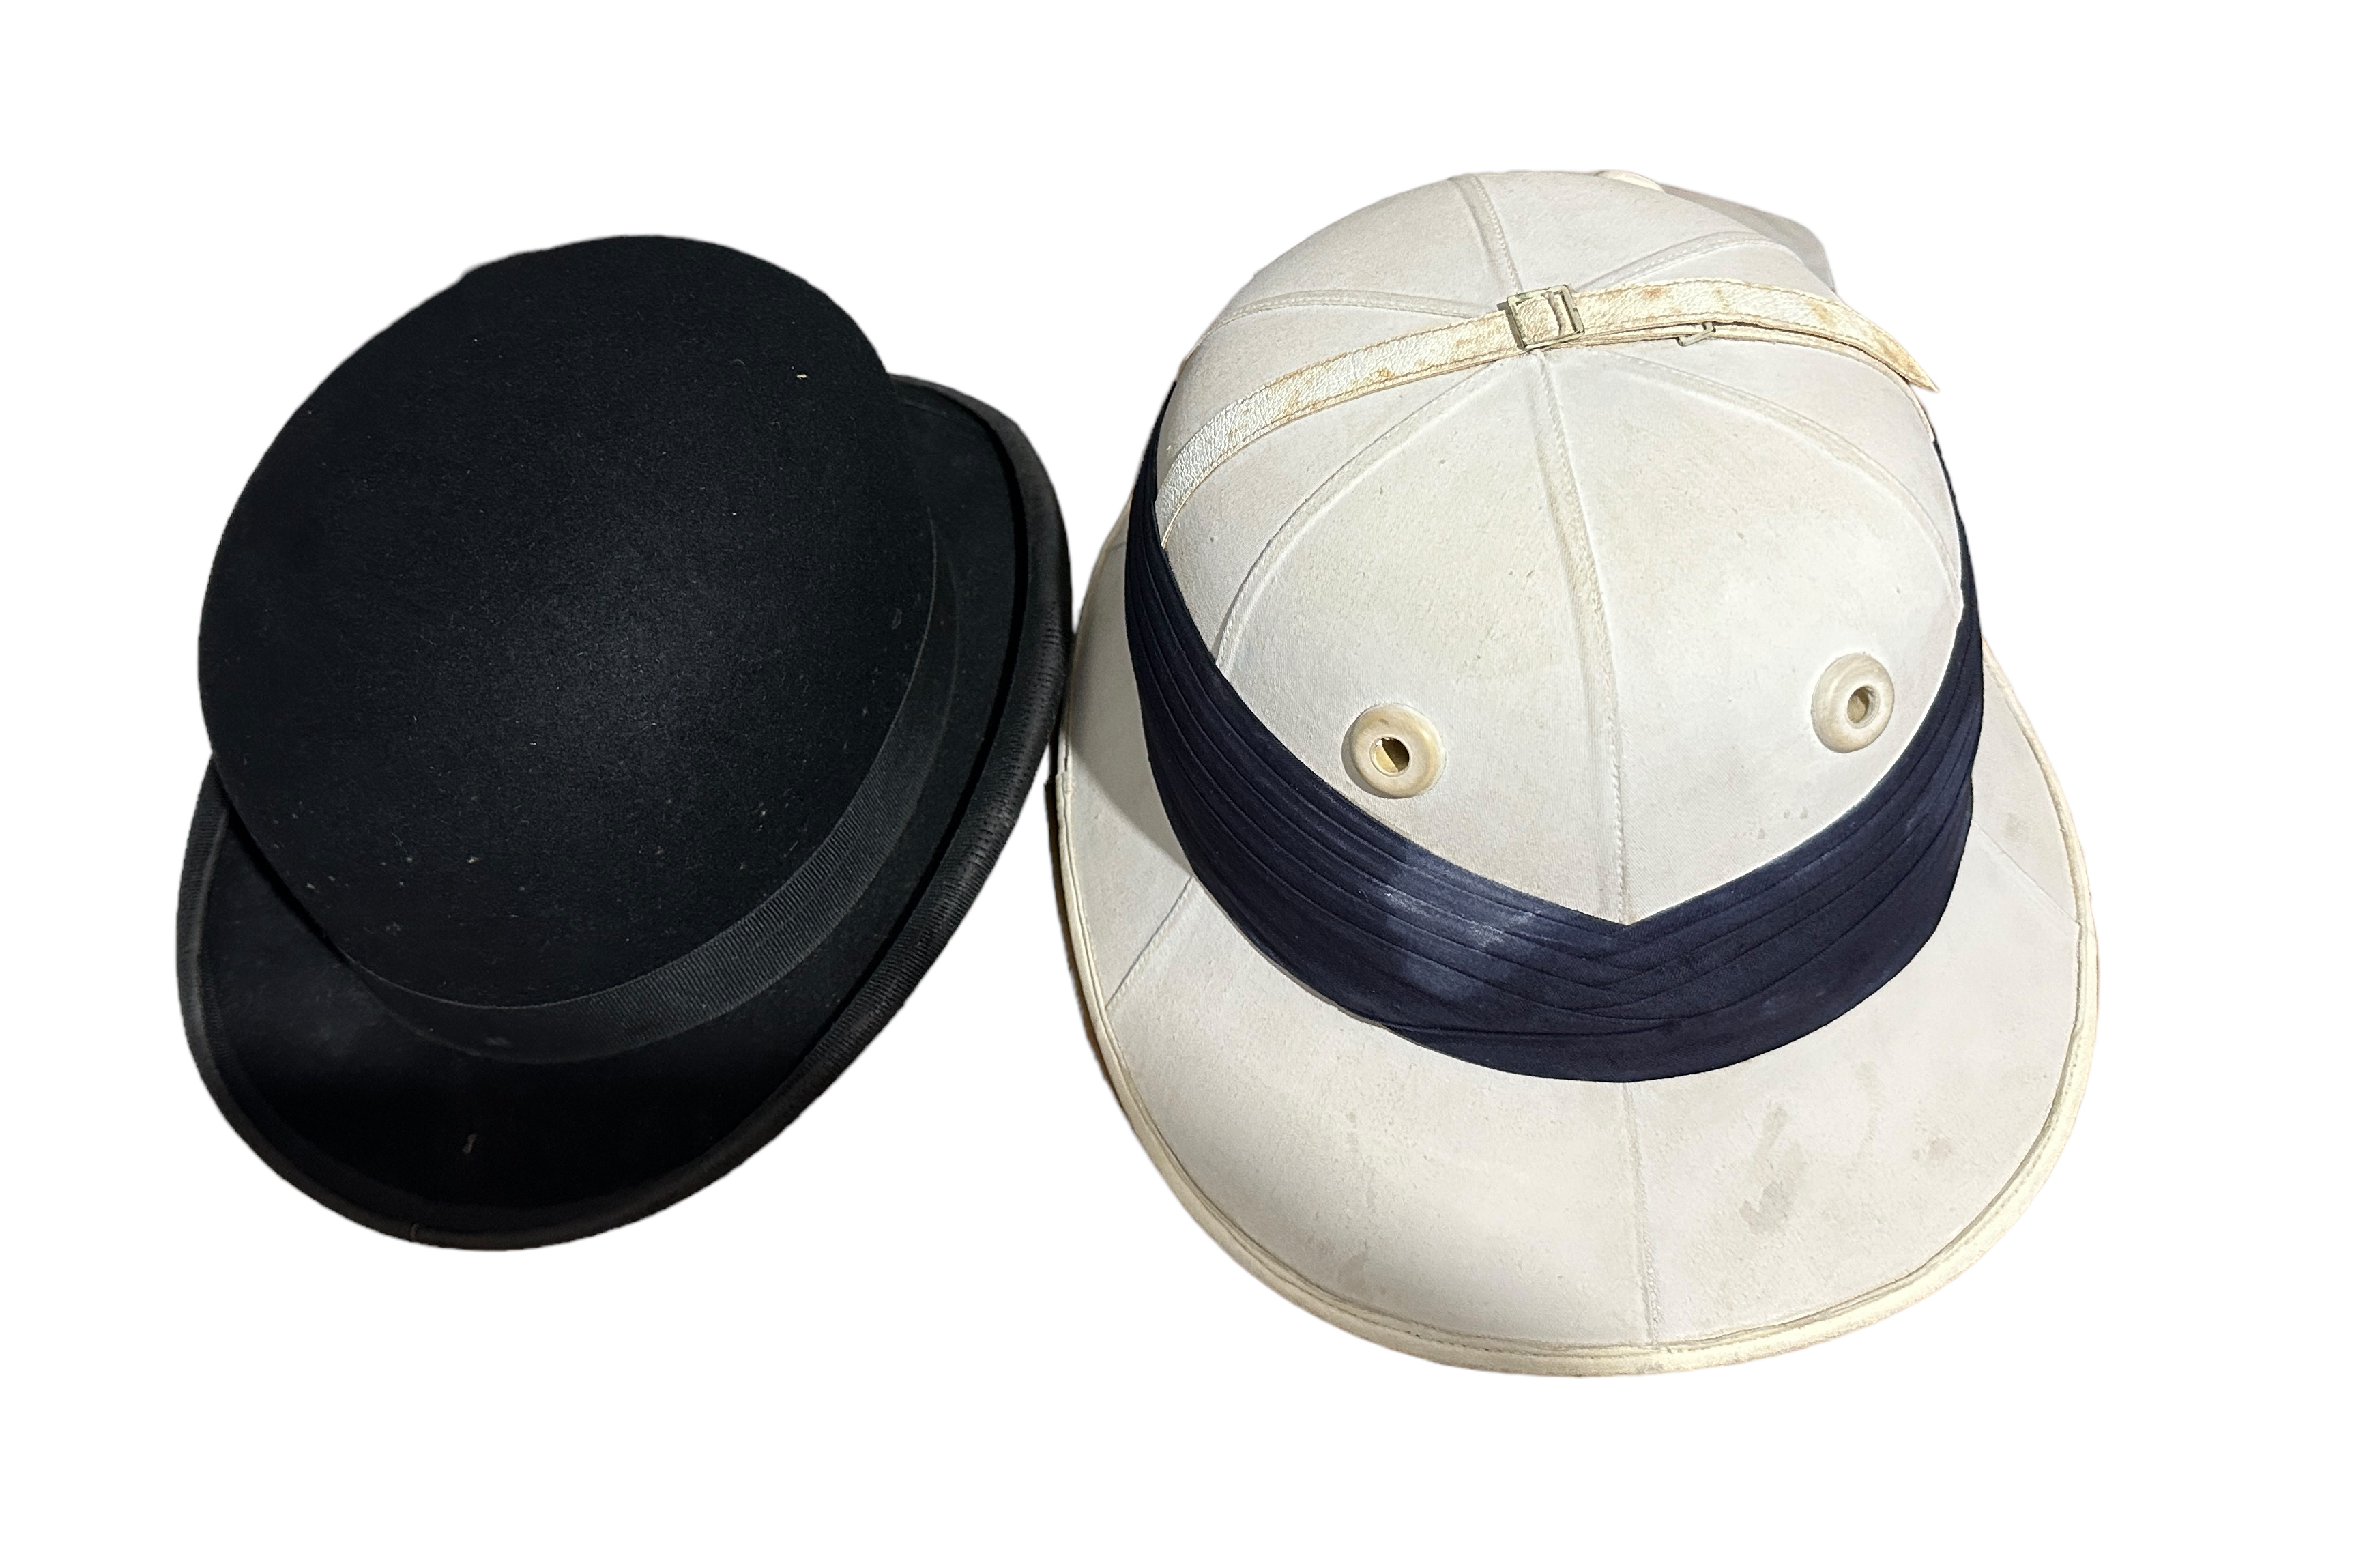 Antique Gieves Bond St London Pith Helmet and Bowler Hat.